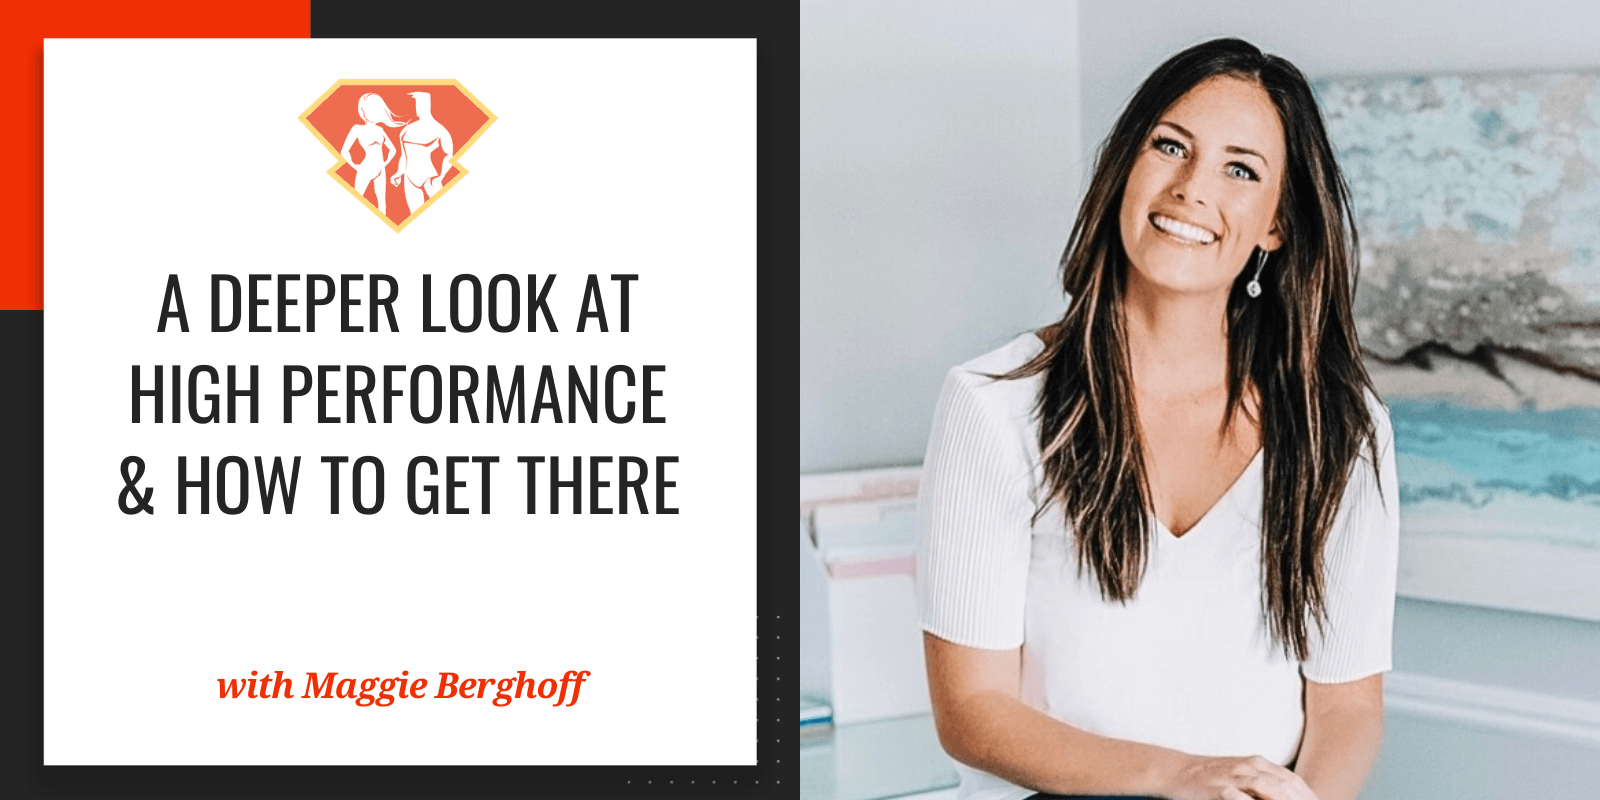 In this episode with Maggie Berghoff, we are talking about her amazing story, and we discover what it really takes, health-wise, to become a high-performer.